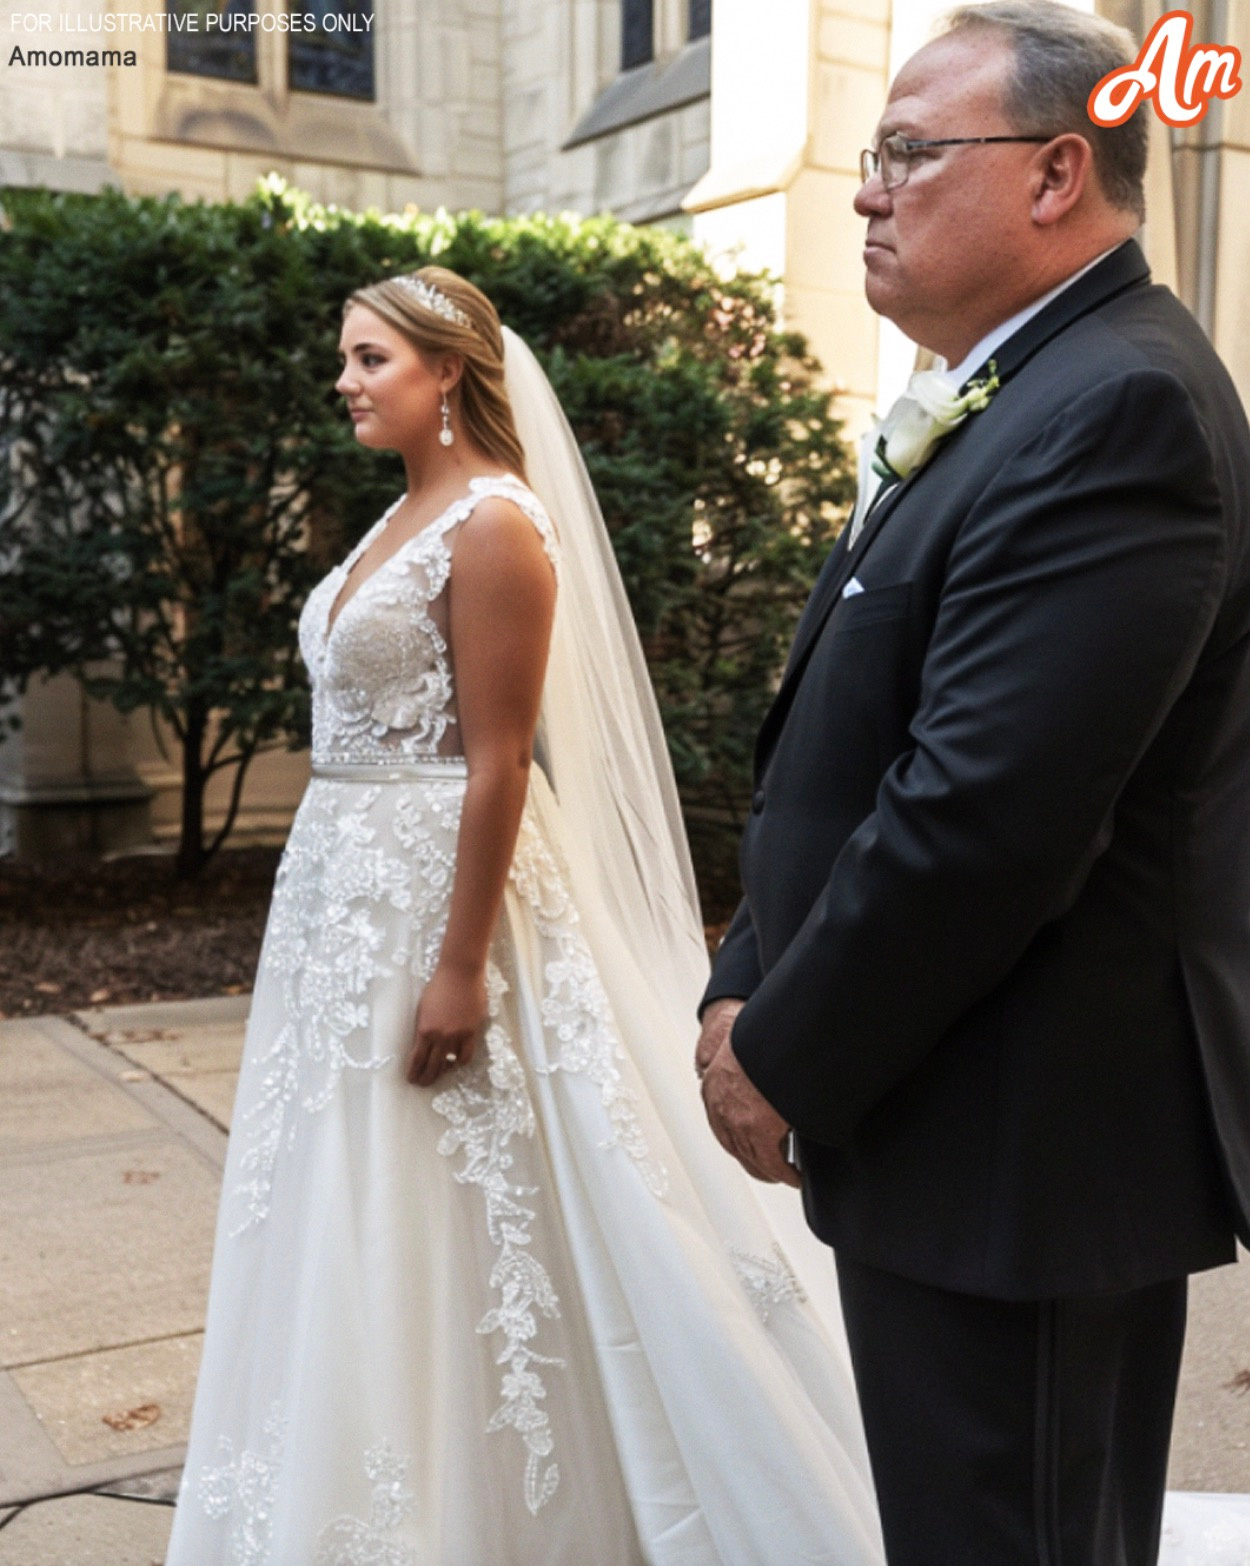 Samantha Faced a Wedding Snub from Her Father-in-Law — The Underlying Reason Left Her Furious